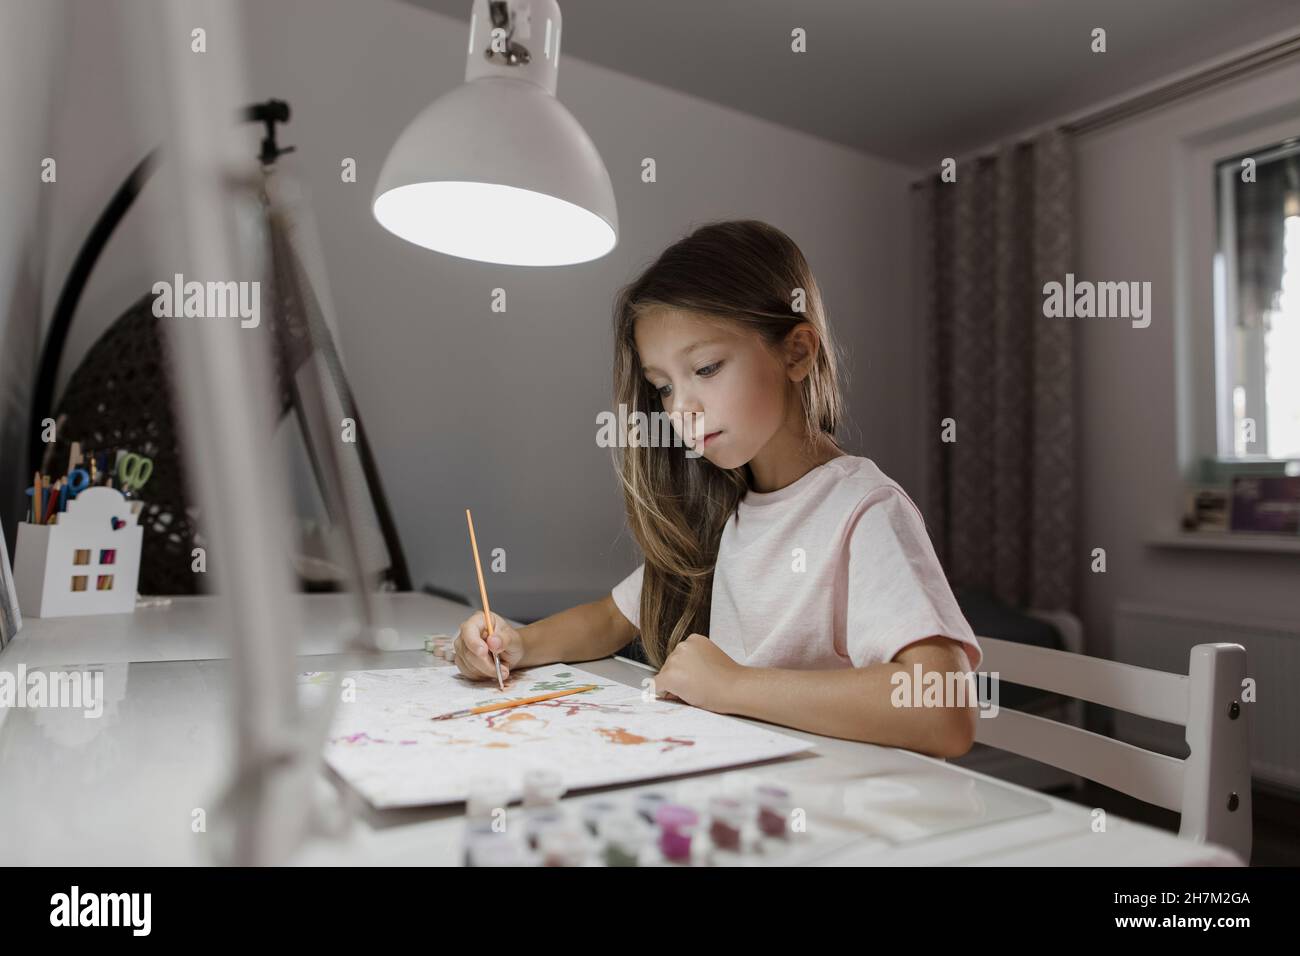 Girl painting on paper at desk Stock Photo